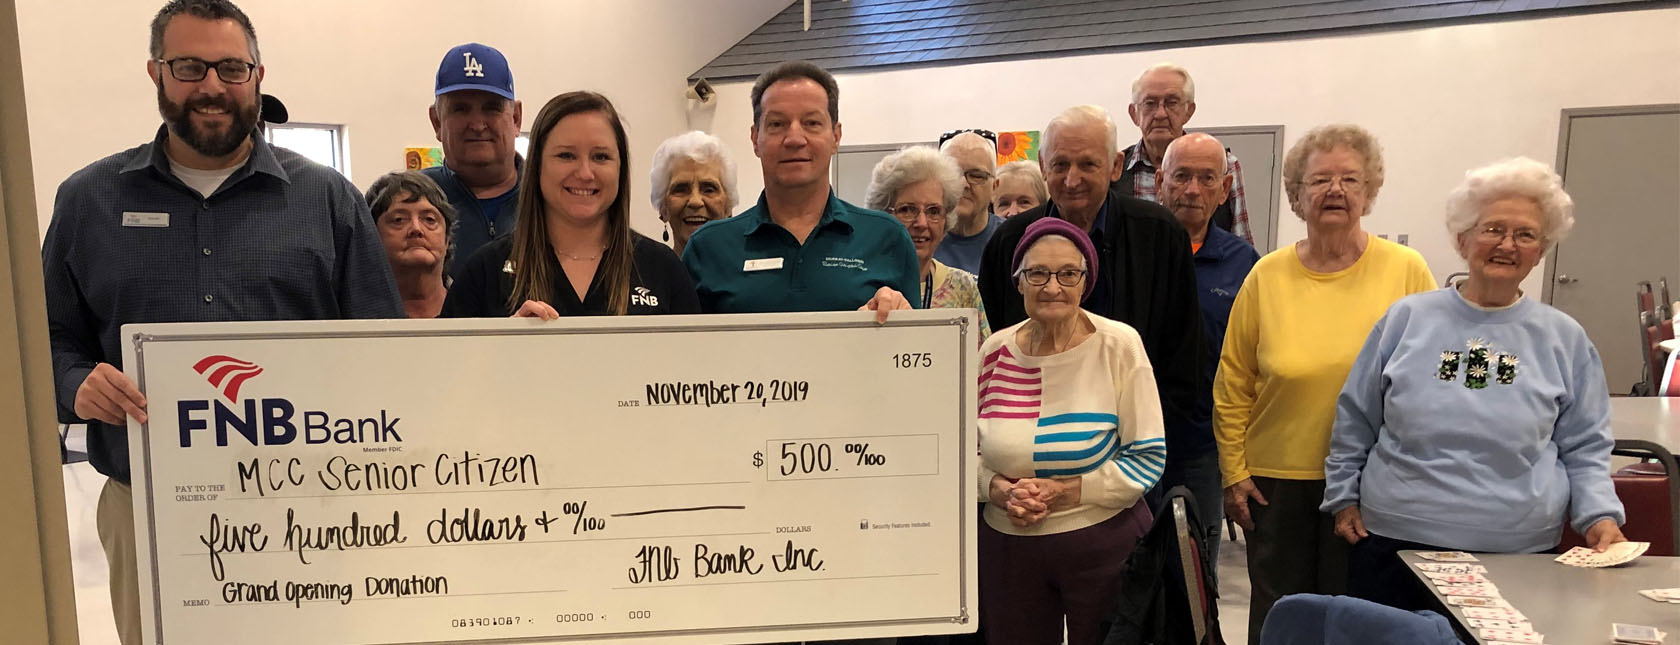 FNB Makes $3,000 Donation to Six Charities in Murray/Calloway County